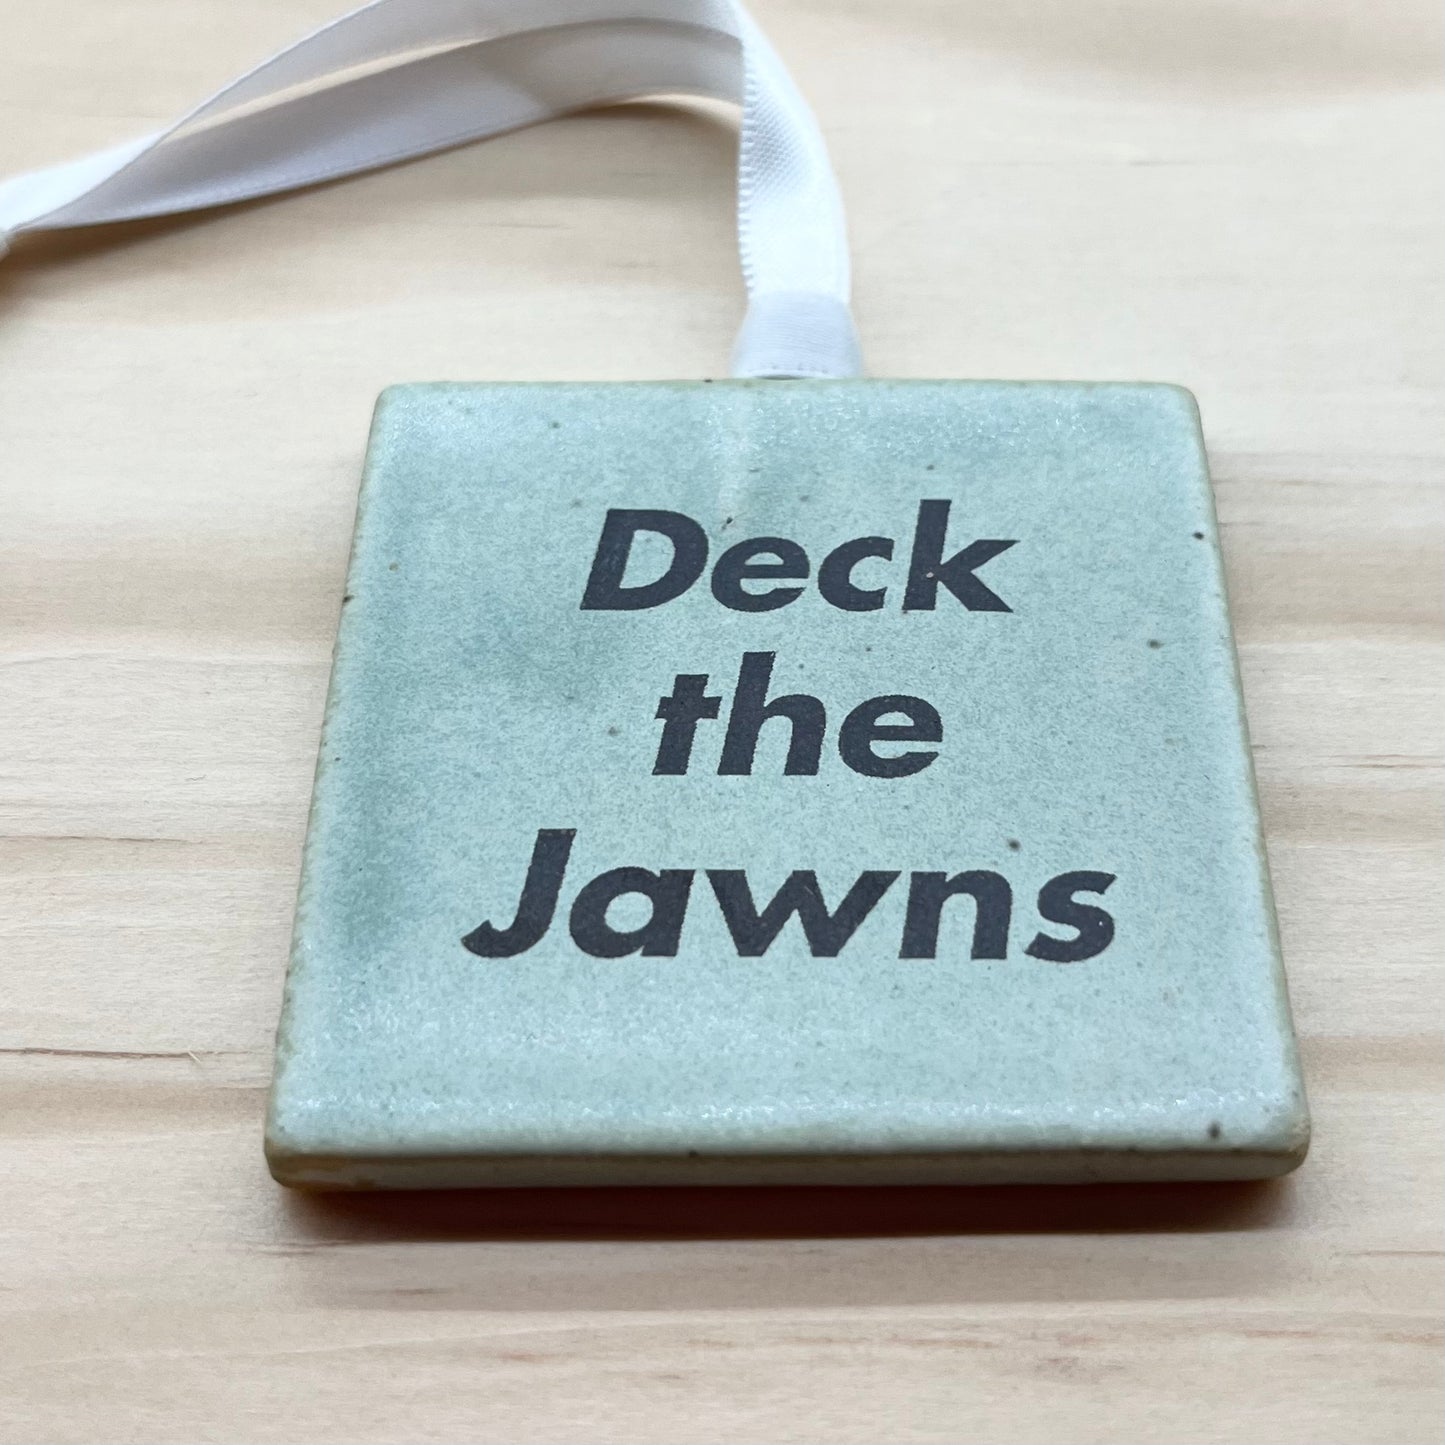 Deck the Jawns Ornament